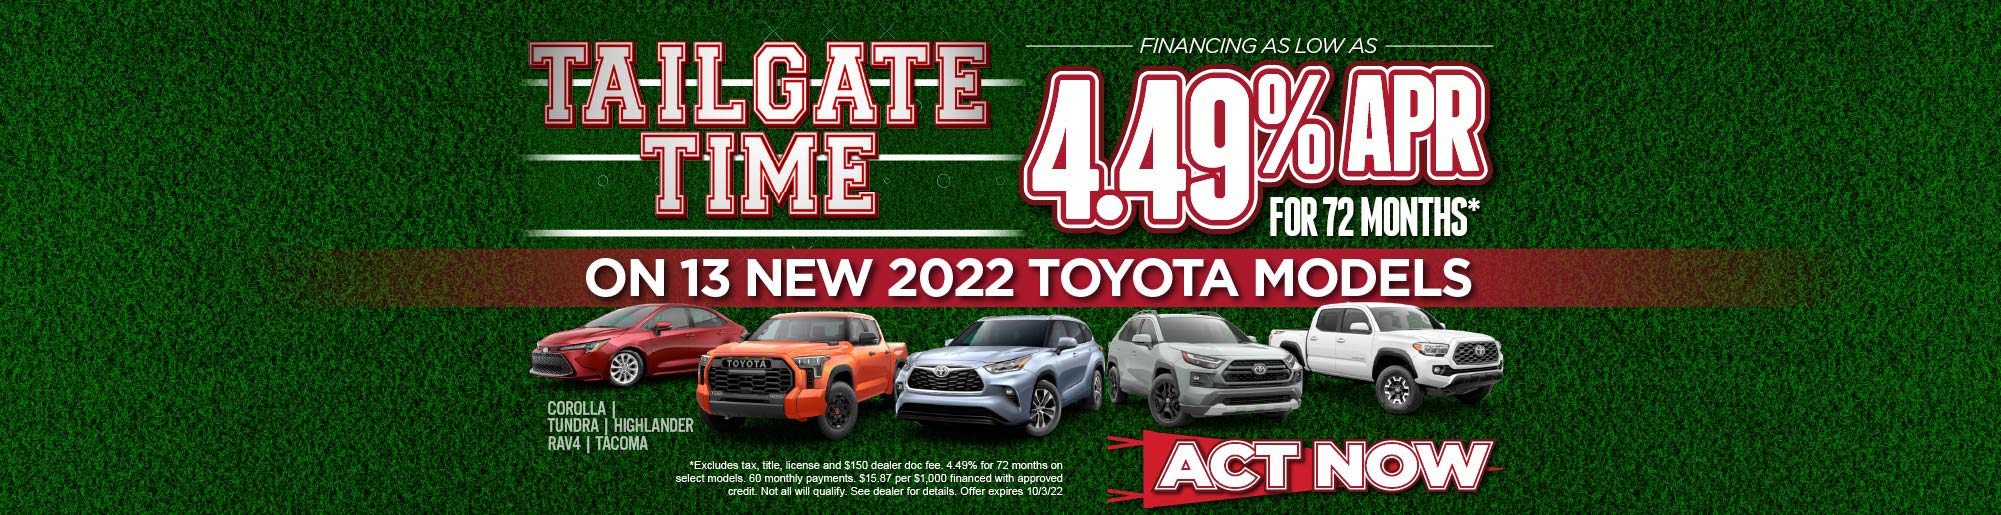 JUST ANNOUNCED! 1.9% APR for 36 Months on 10 New 2022 Toyota Models. Huge Savings. Over 500 New, Certified Pre-Owned and Pre-Owned Vehicles Available.